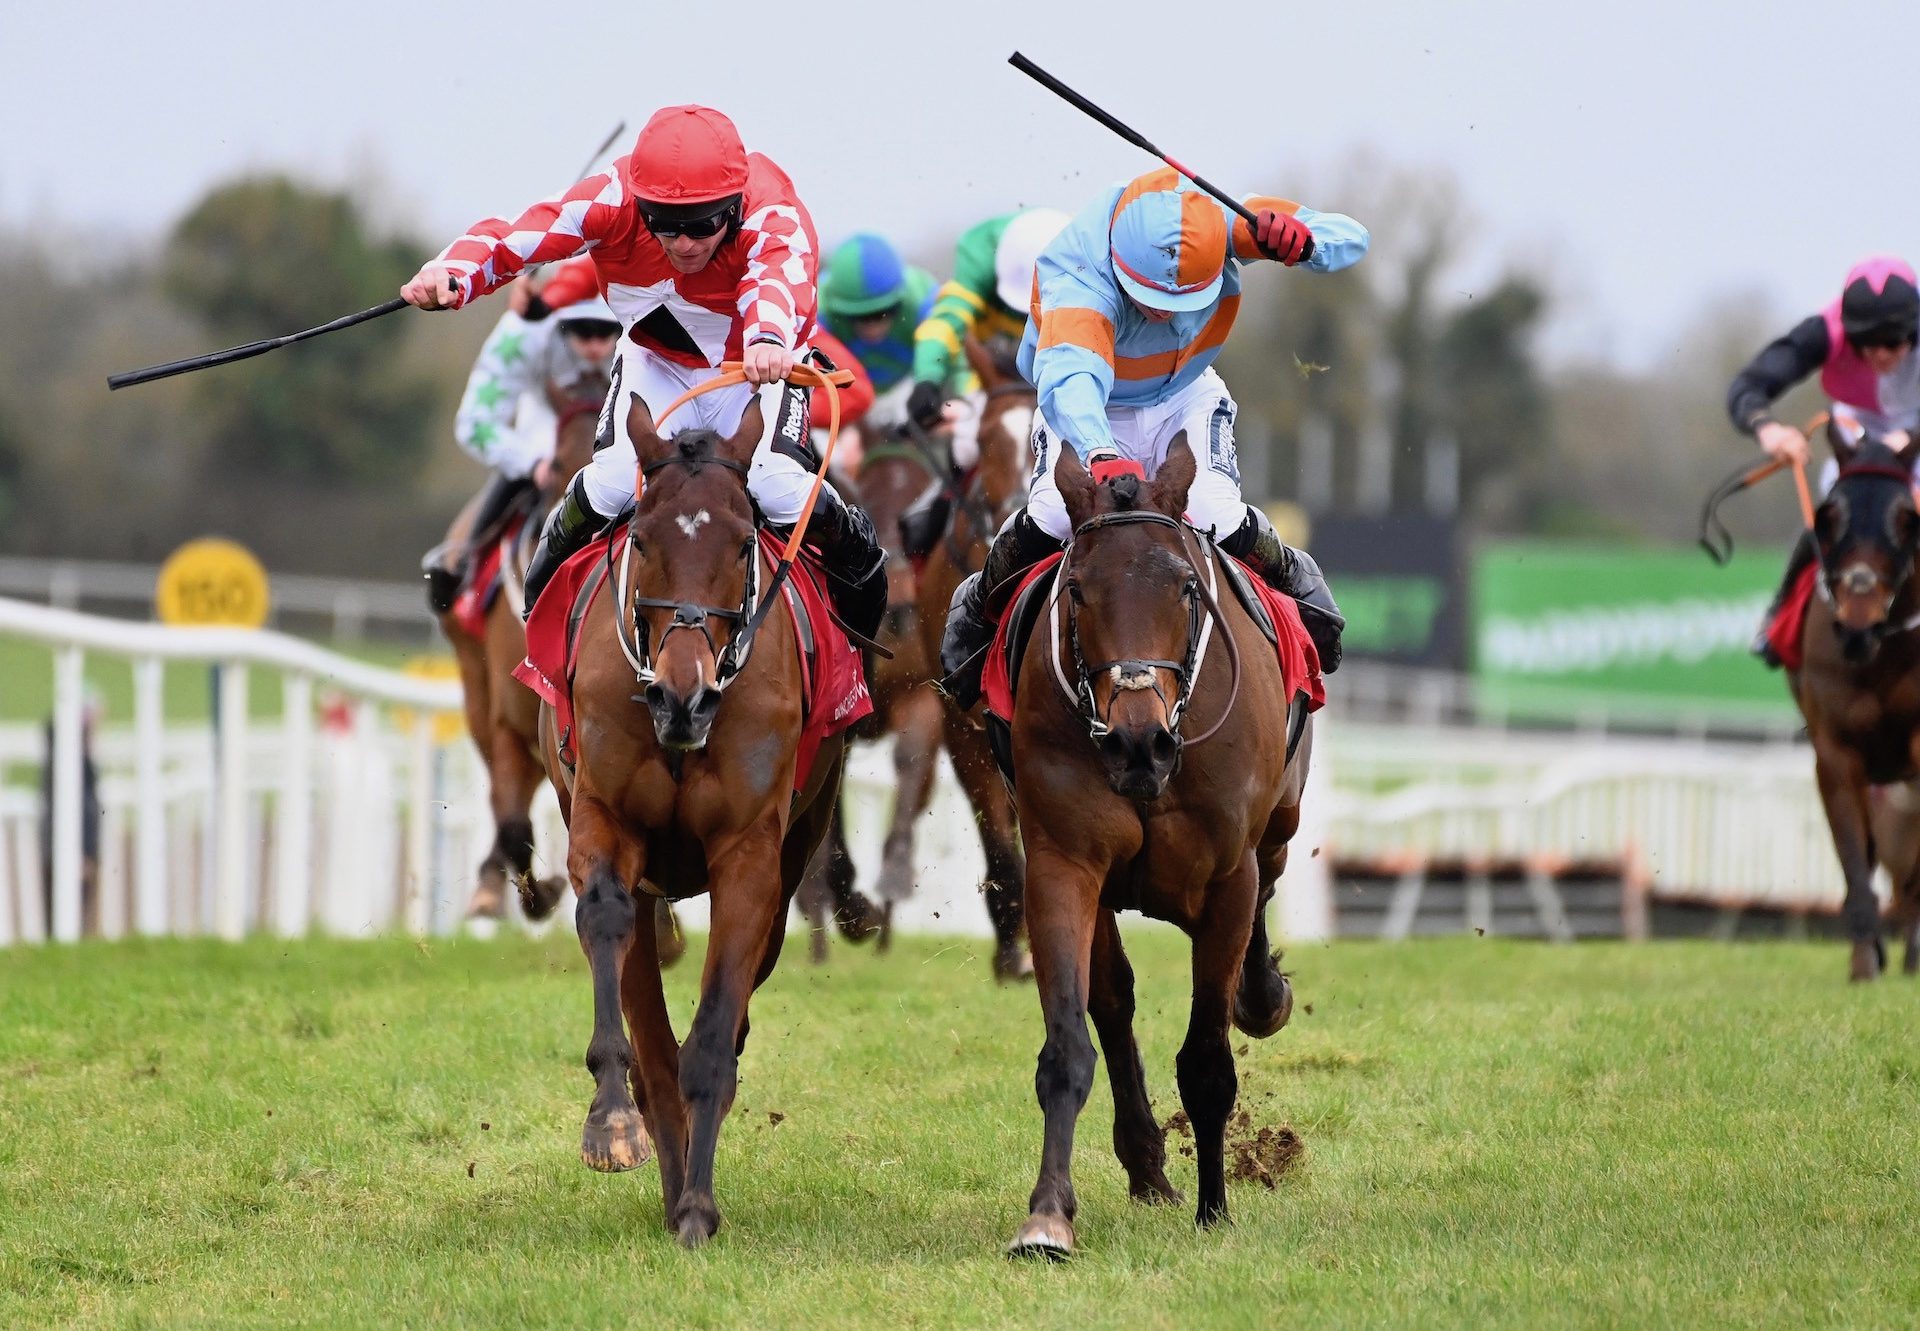 Sa Fureur (Walk In The Park) Wins The Rated Novice Hurdle At Punchestown